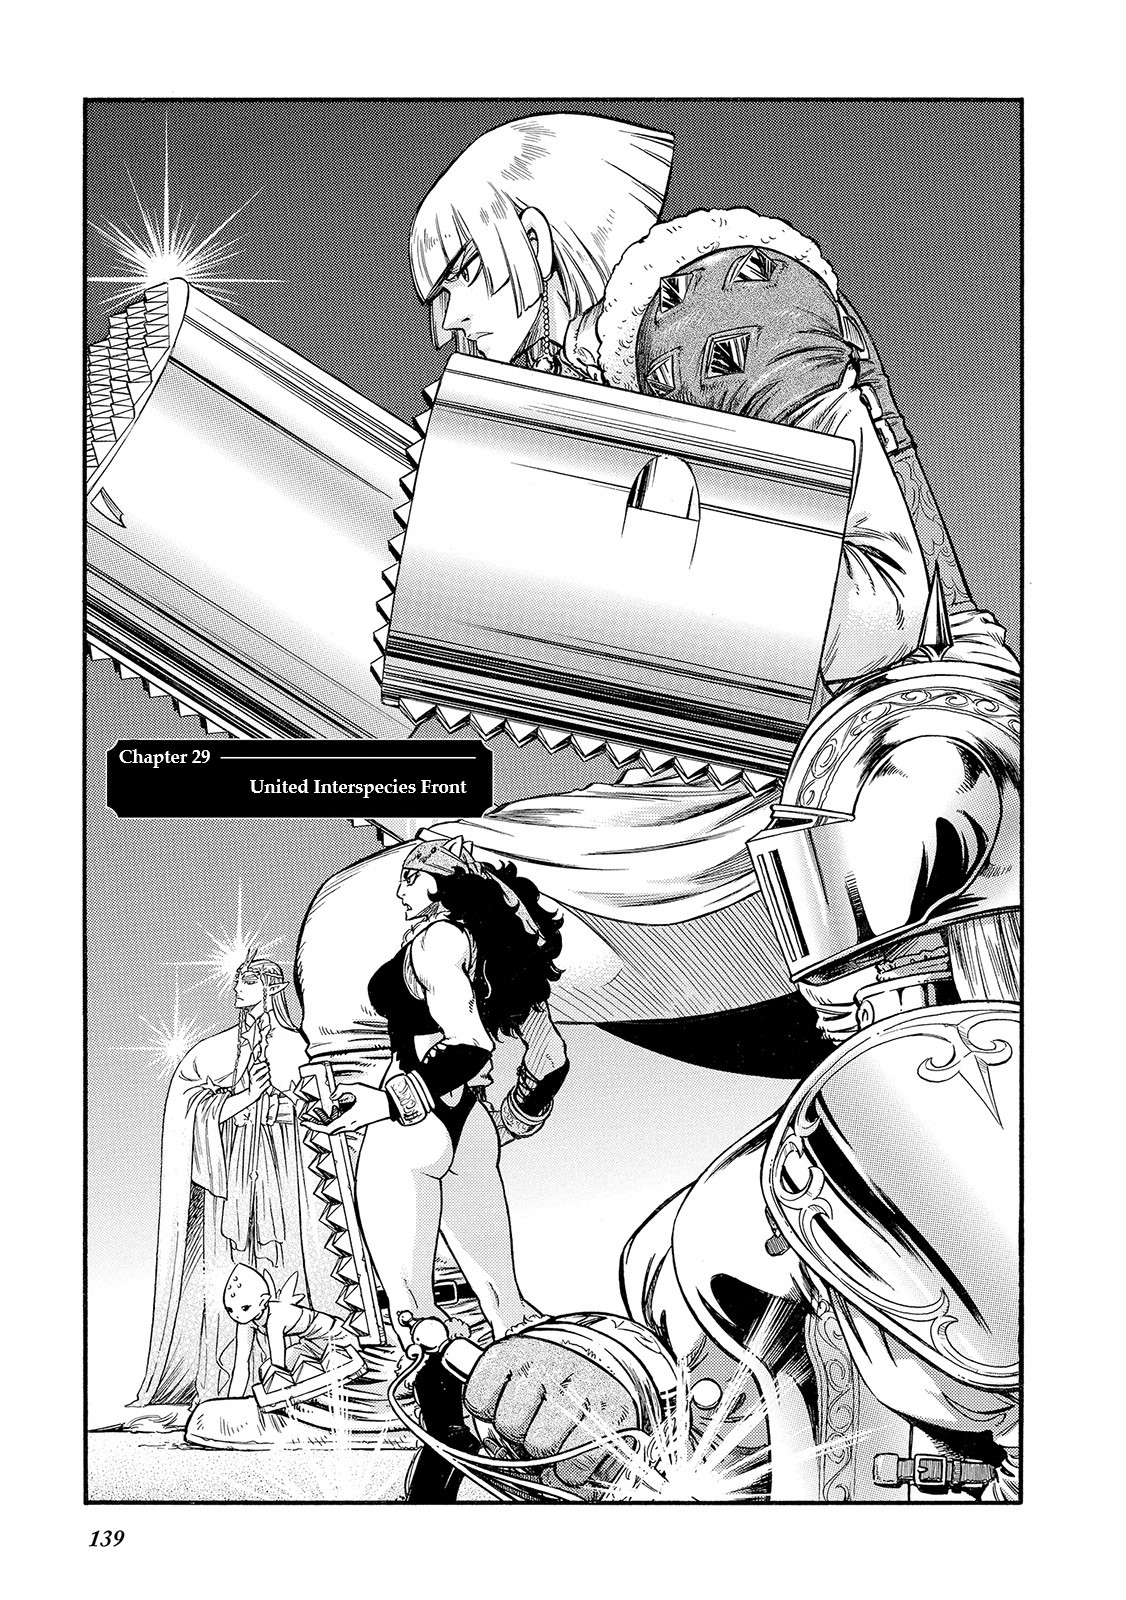 Stravaganza - Isai No Hime Vol.5 Chapter 29: United Interspecies Front - Picture 2